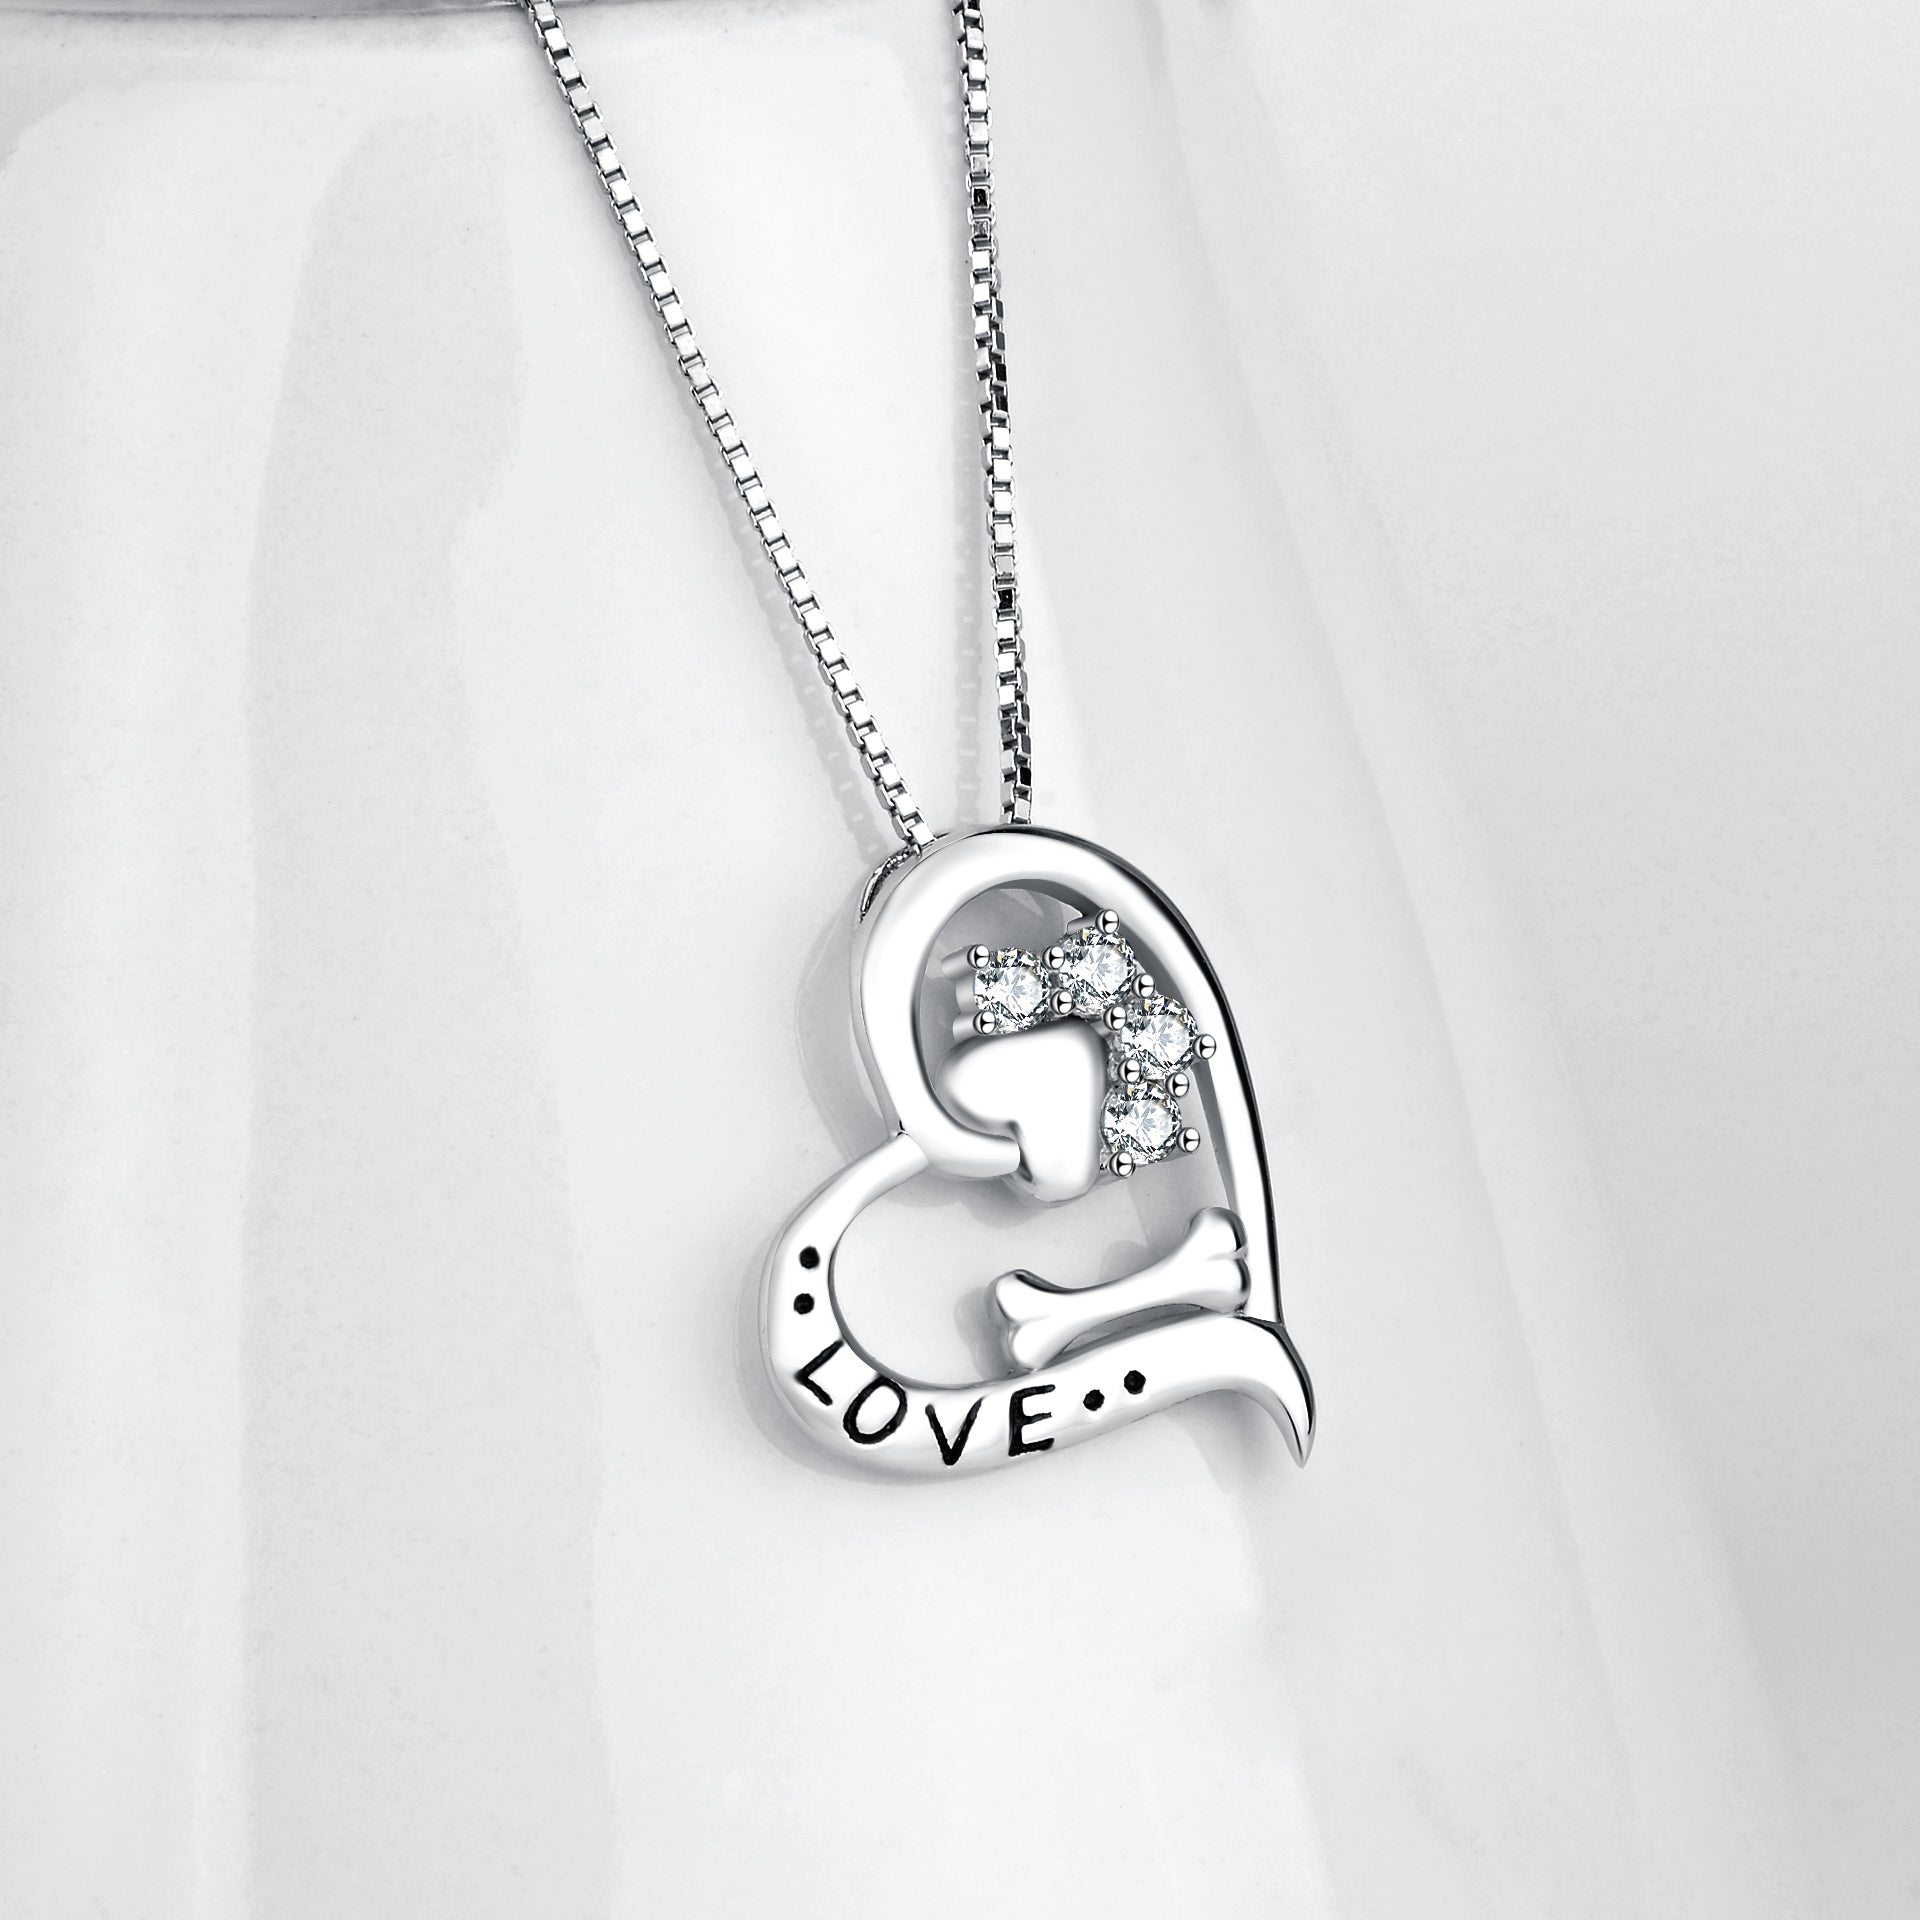 New Novelty Necklace Jewelry Heart Charm with Cute Dog Puppy Footprints Necklace